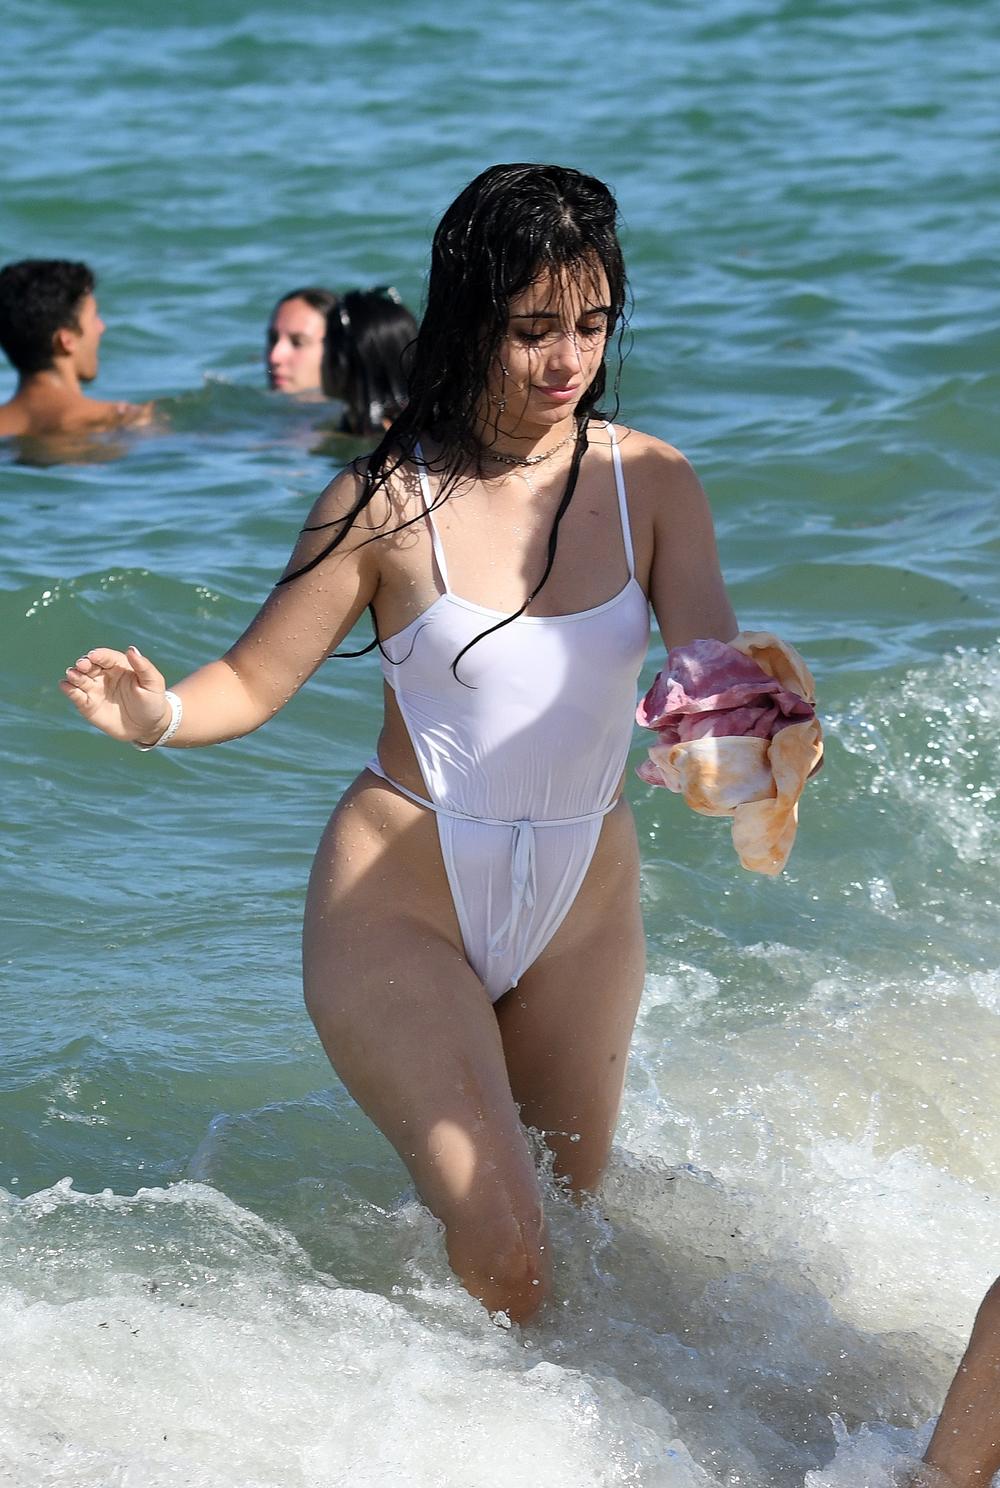 Camila Cabello Gets Wet in a See-Through White Bathing Suit